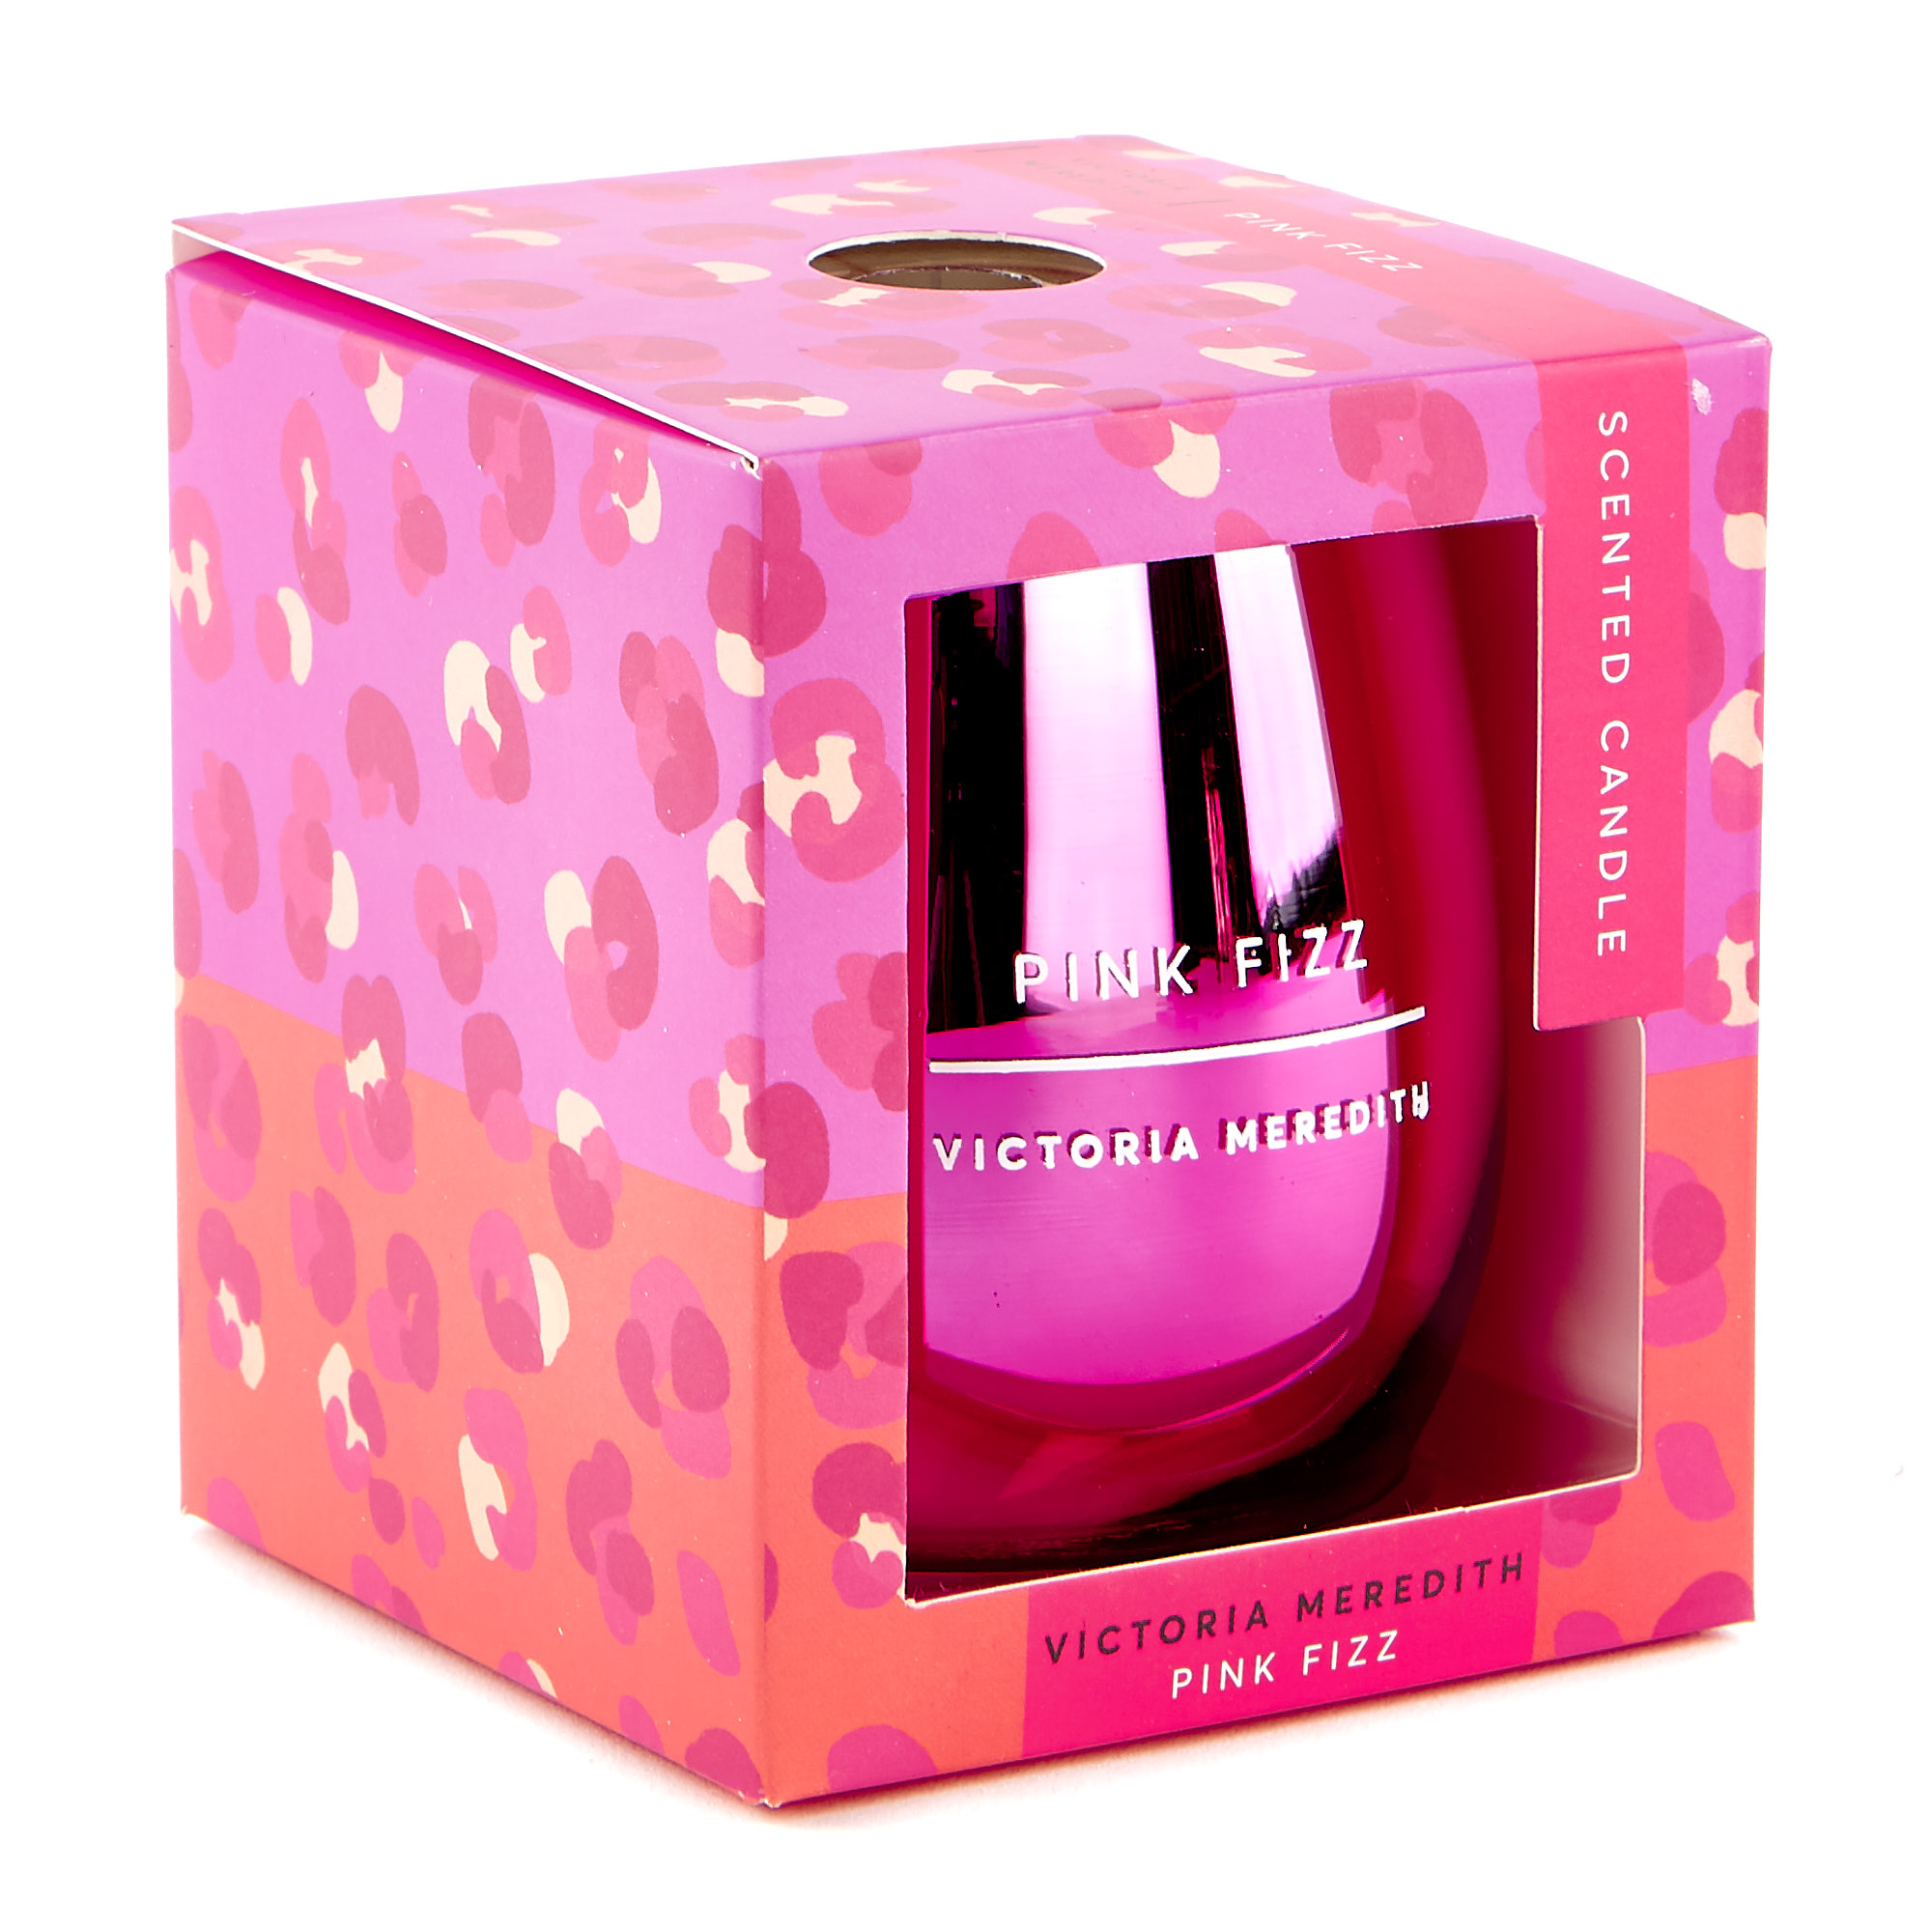 Victoria Meredith Pink Fizz Scented Candle